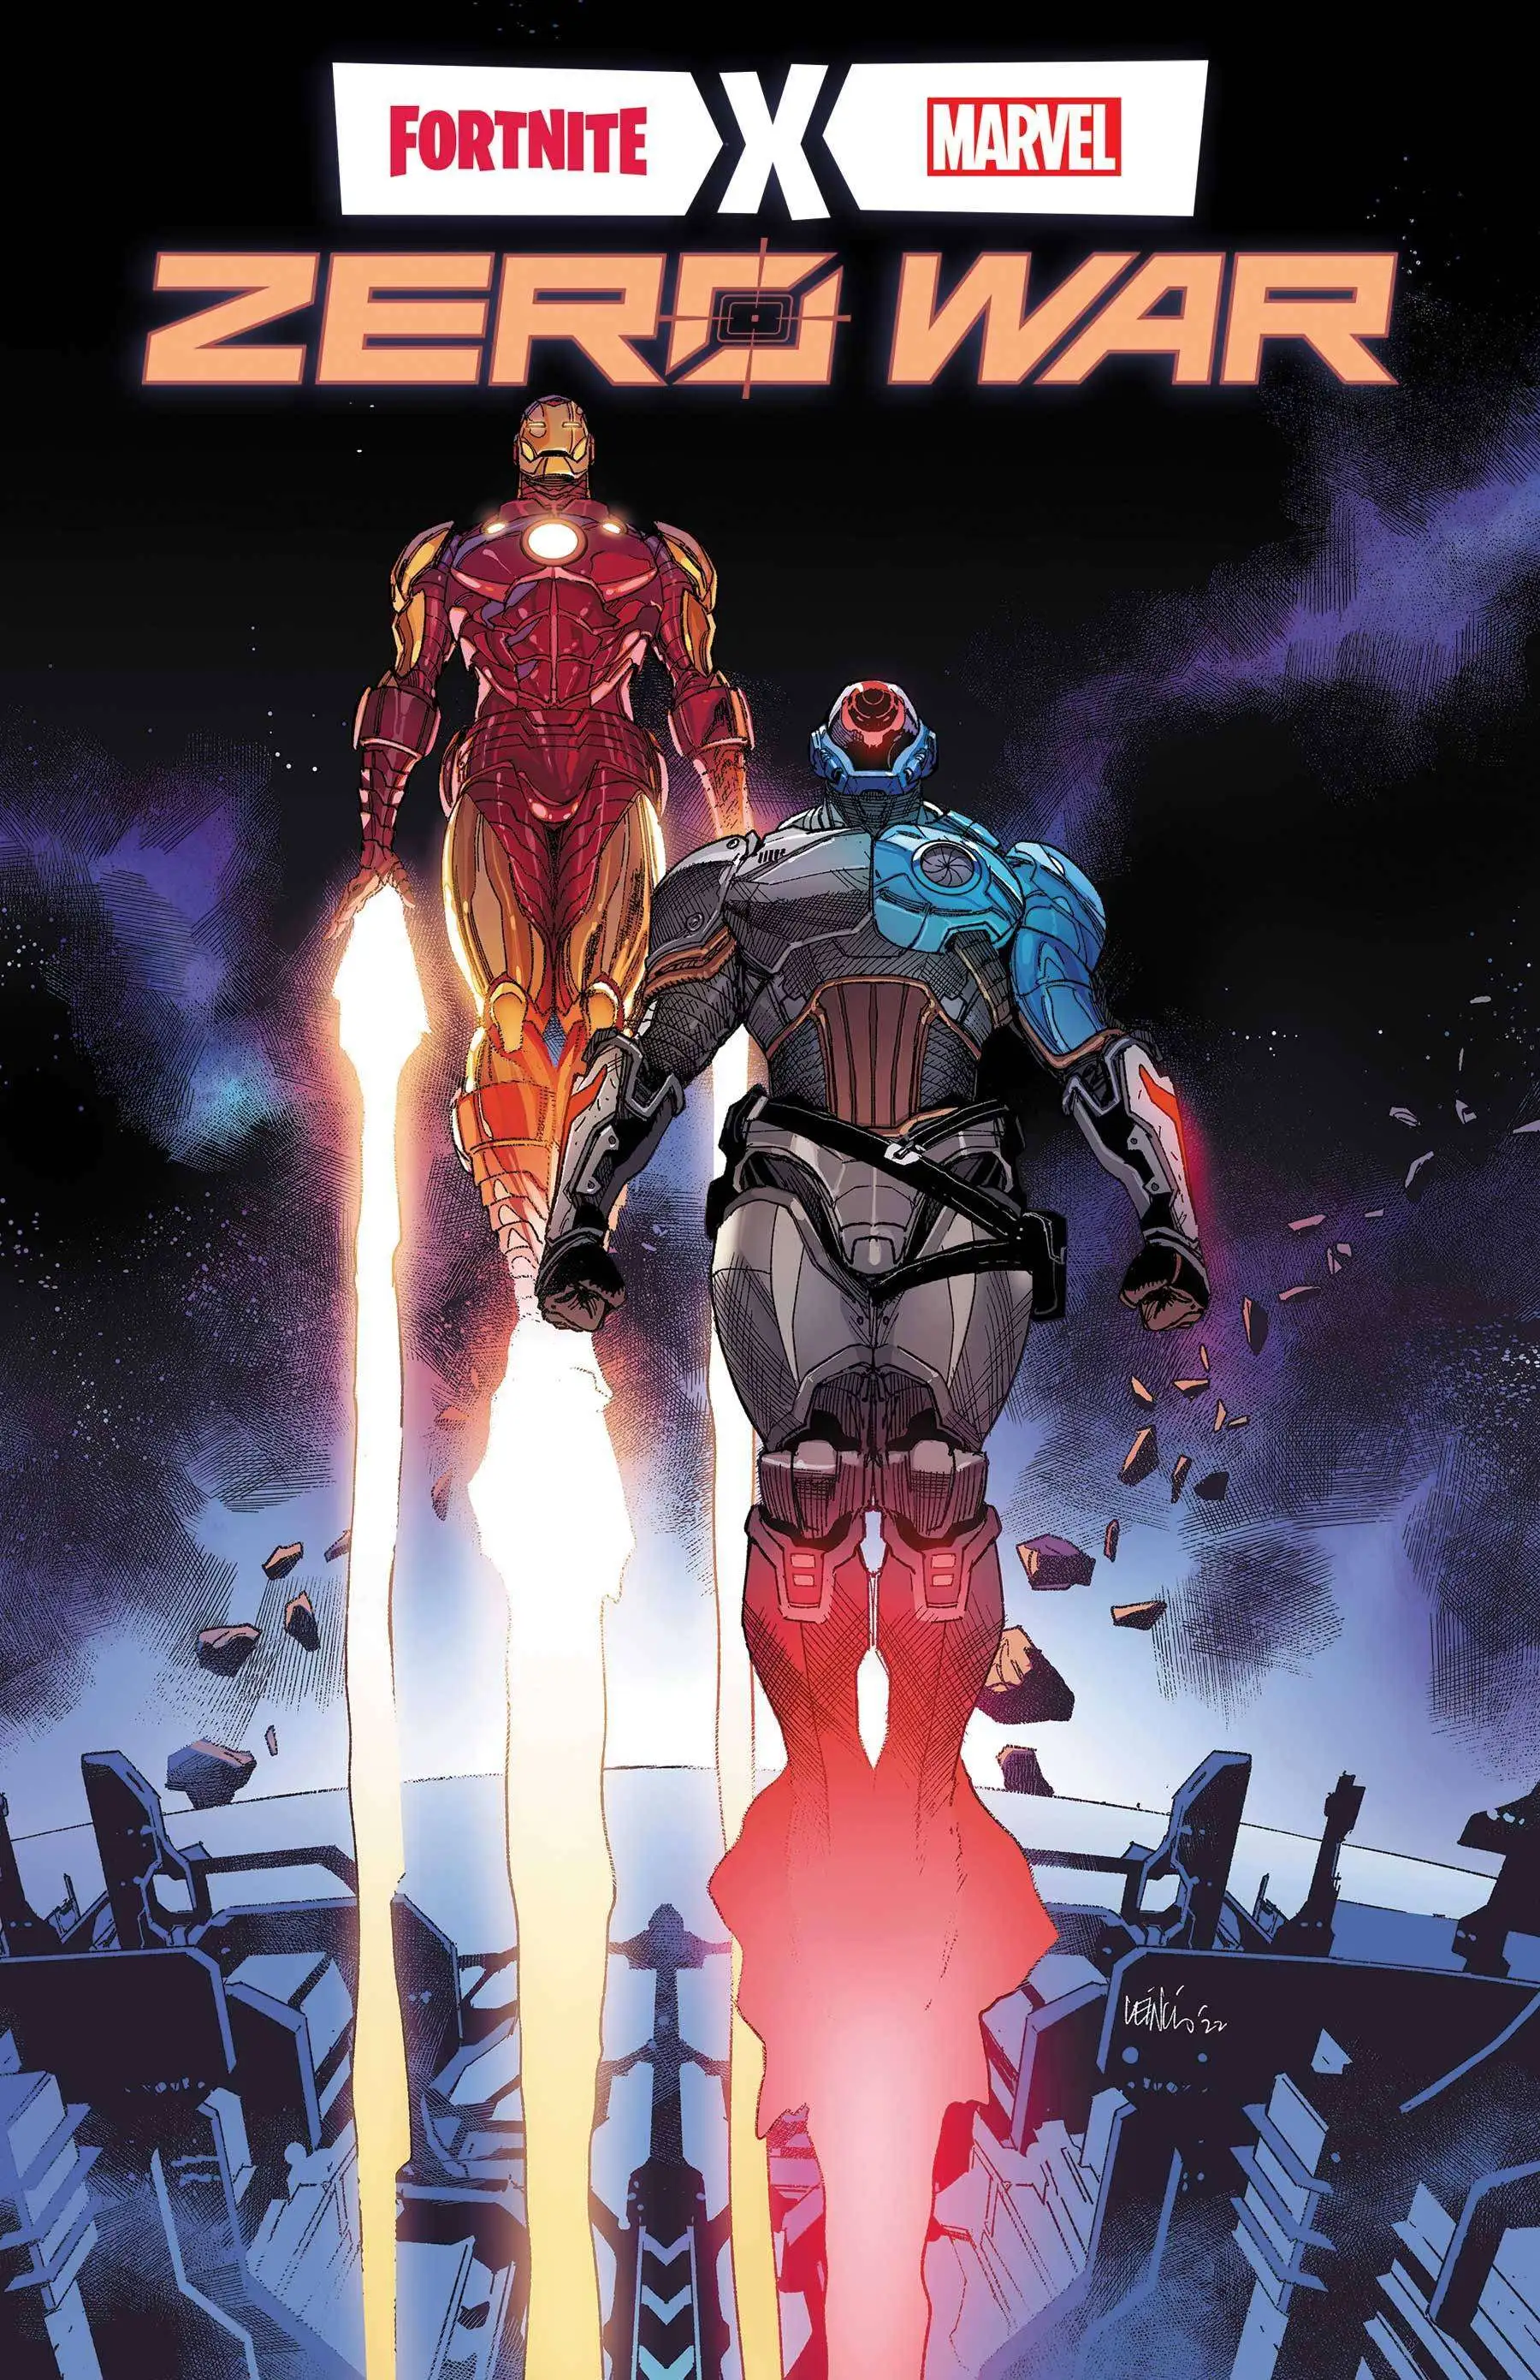 Fortnite X Marvel: Zero War #2 of 5 Comic Book [Comes with Code to Unlock New Iron Man Outfit Wrap!] (Pre-Order ships July)